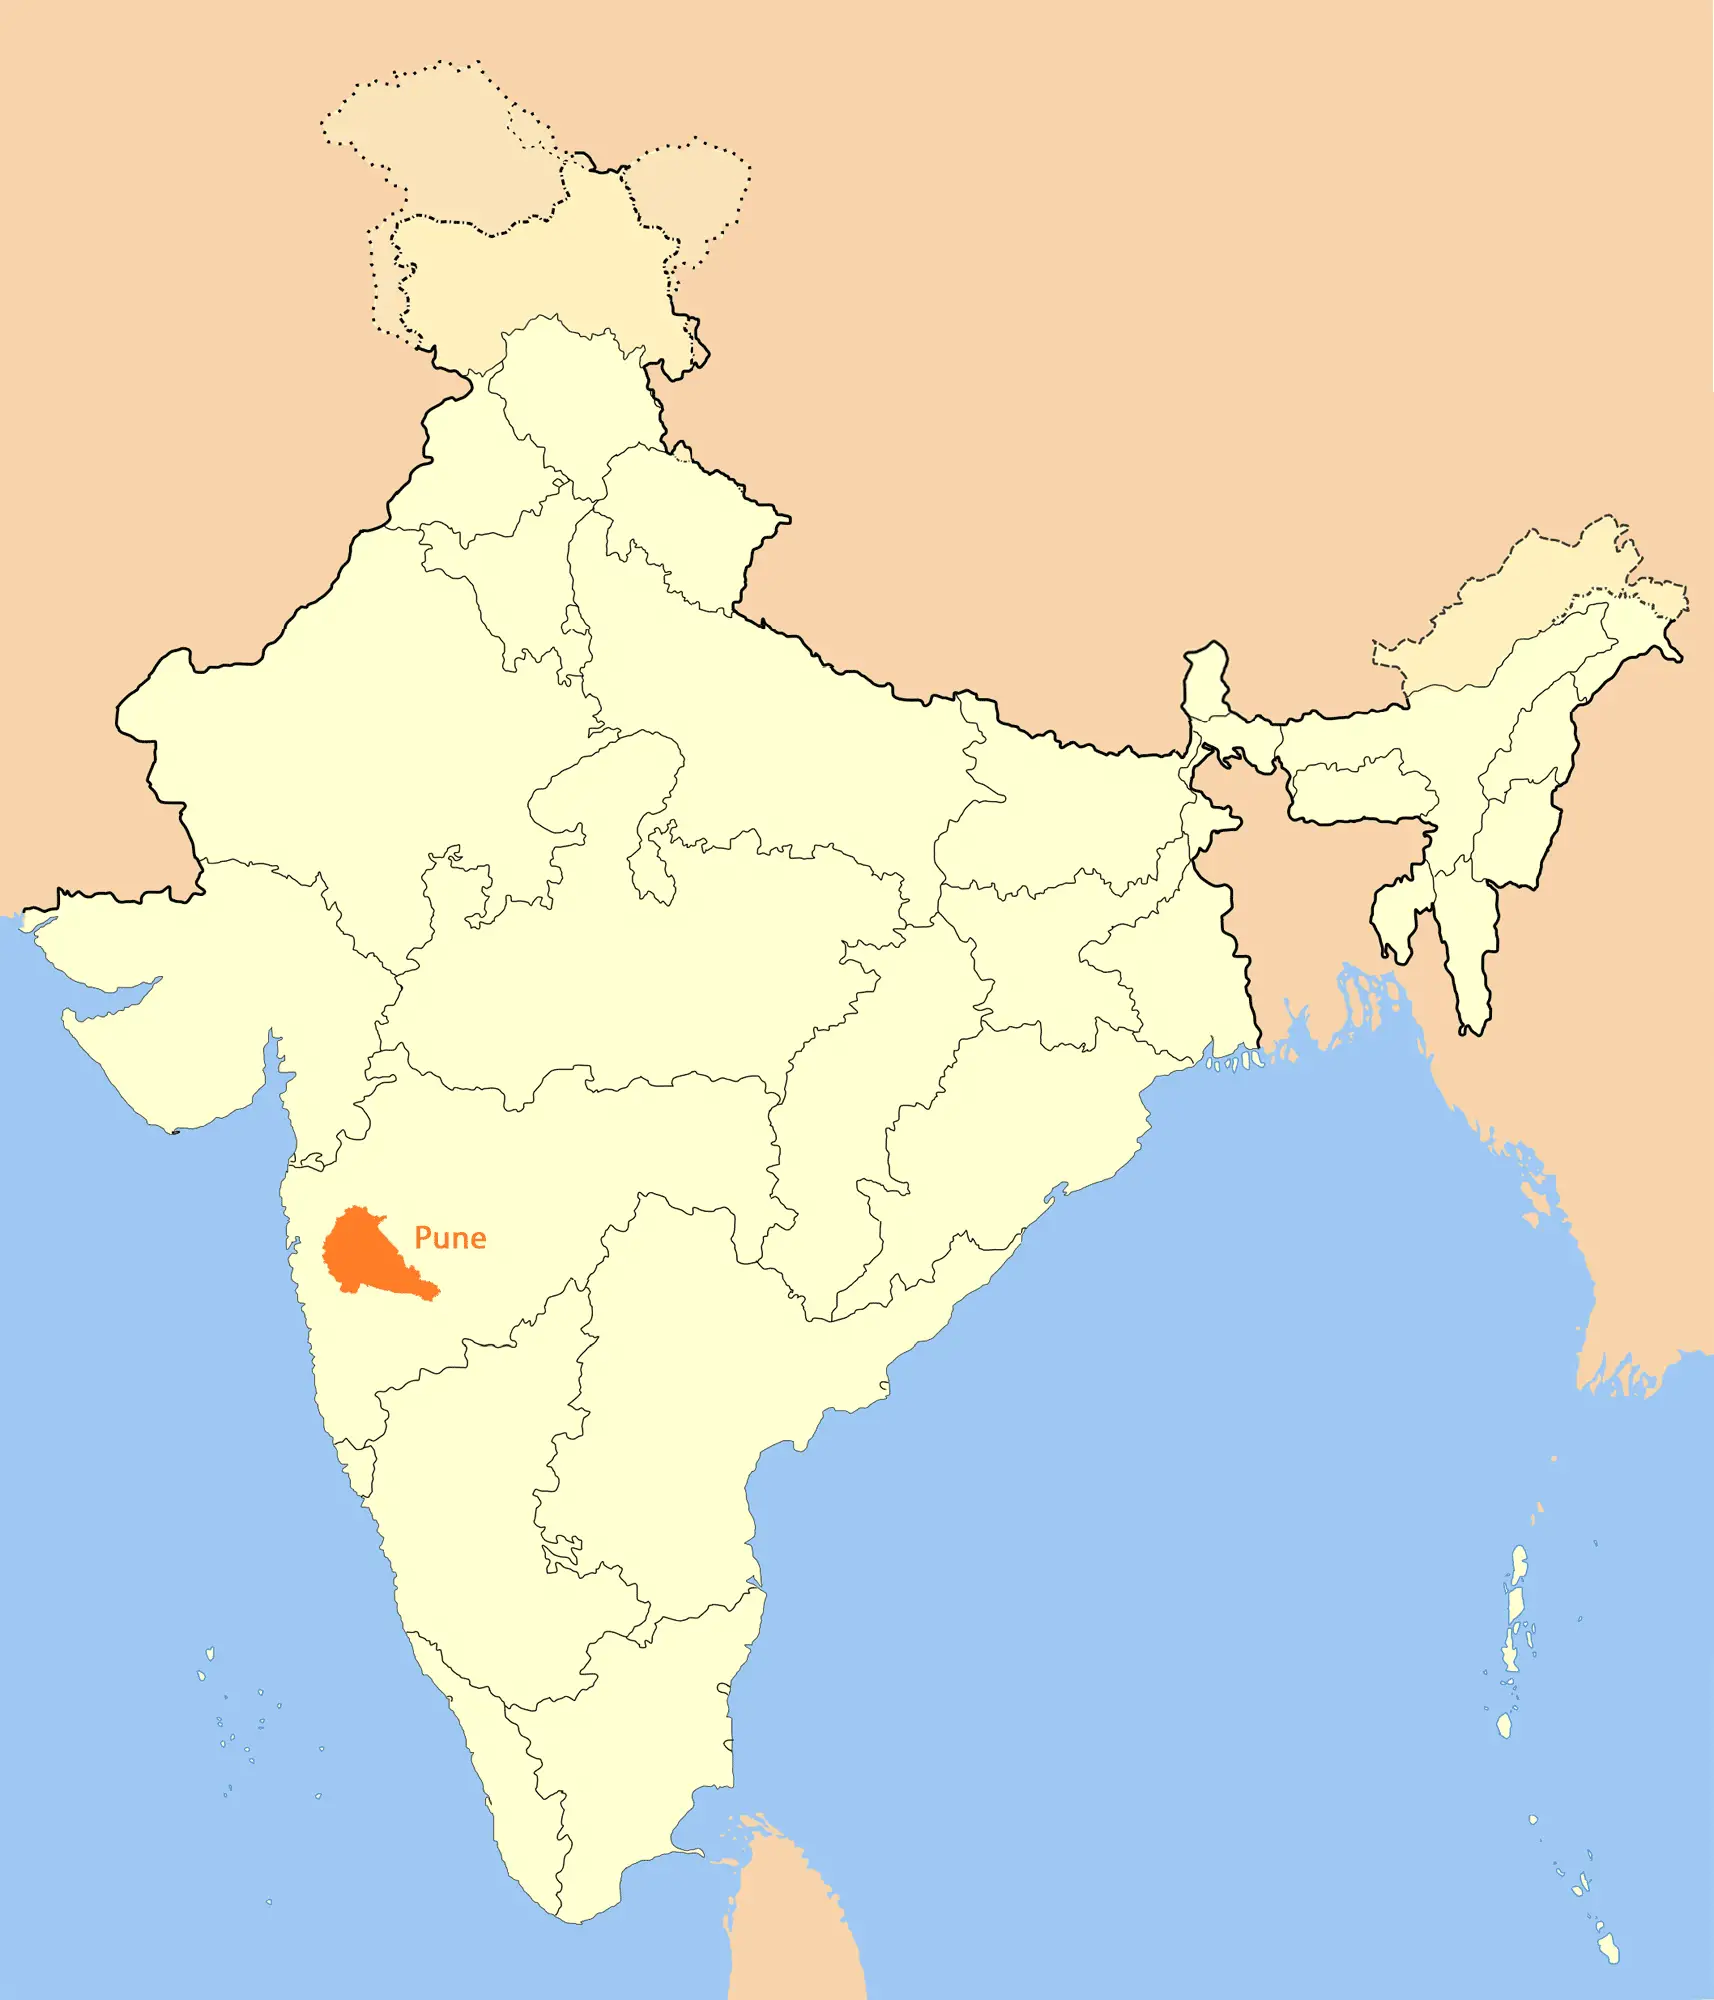 Location Map of Pune